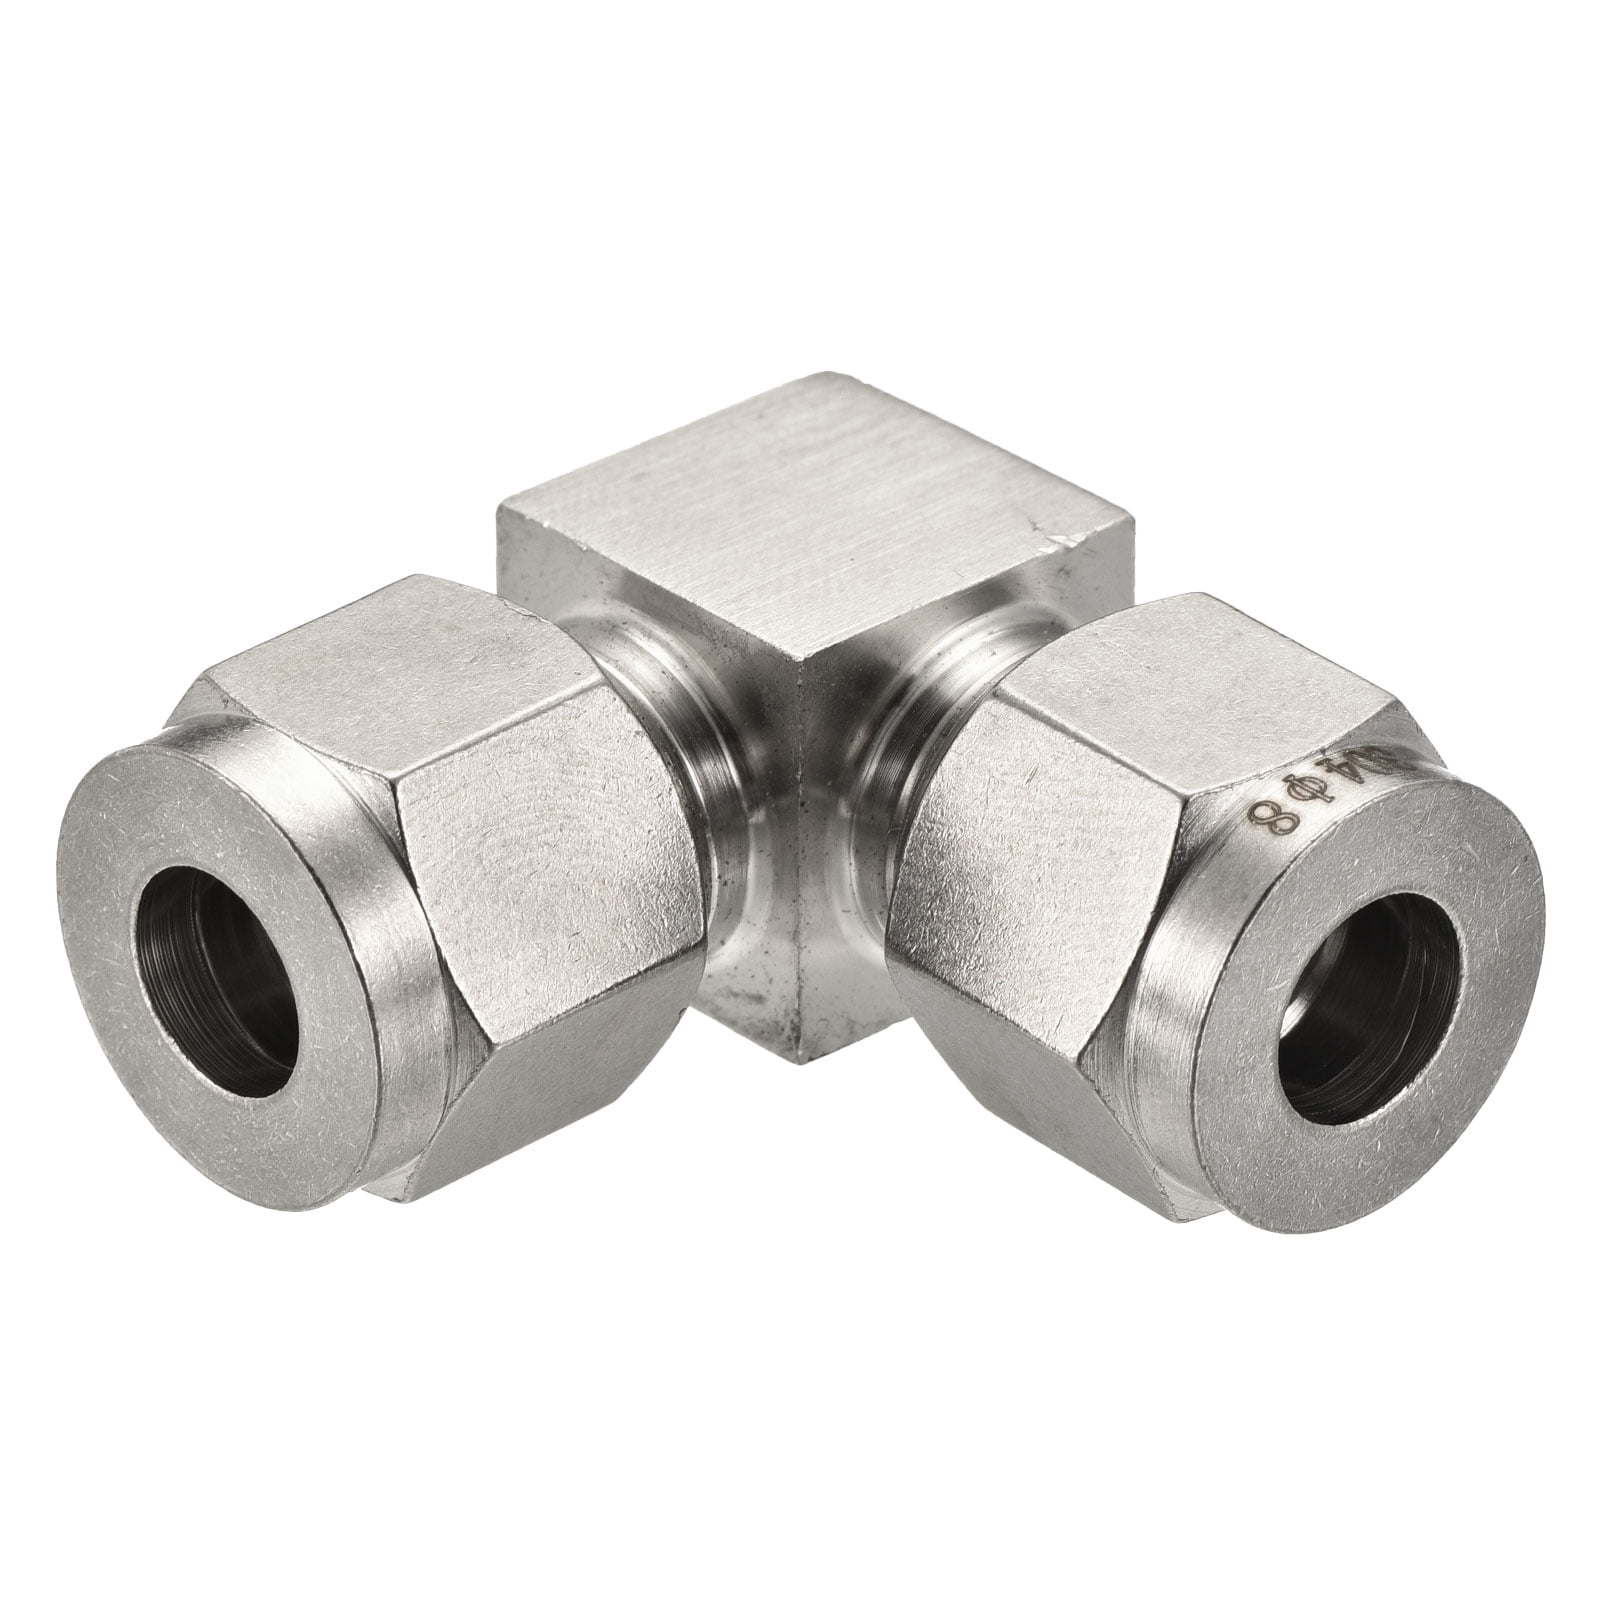 Uxcell 90 Degree Union Elbow 6mm to 6mm OD Tube Stainless Steel Compression  Tube Fitting 